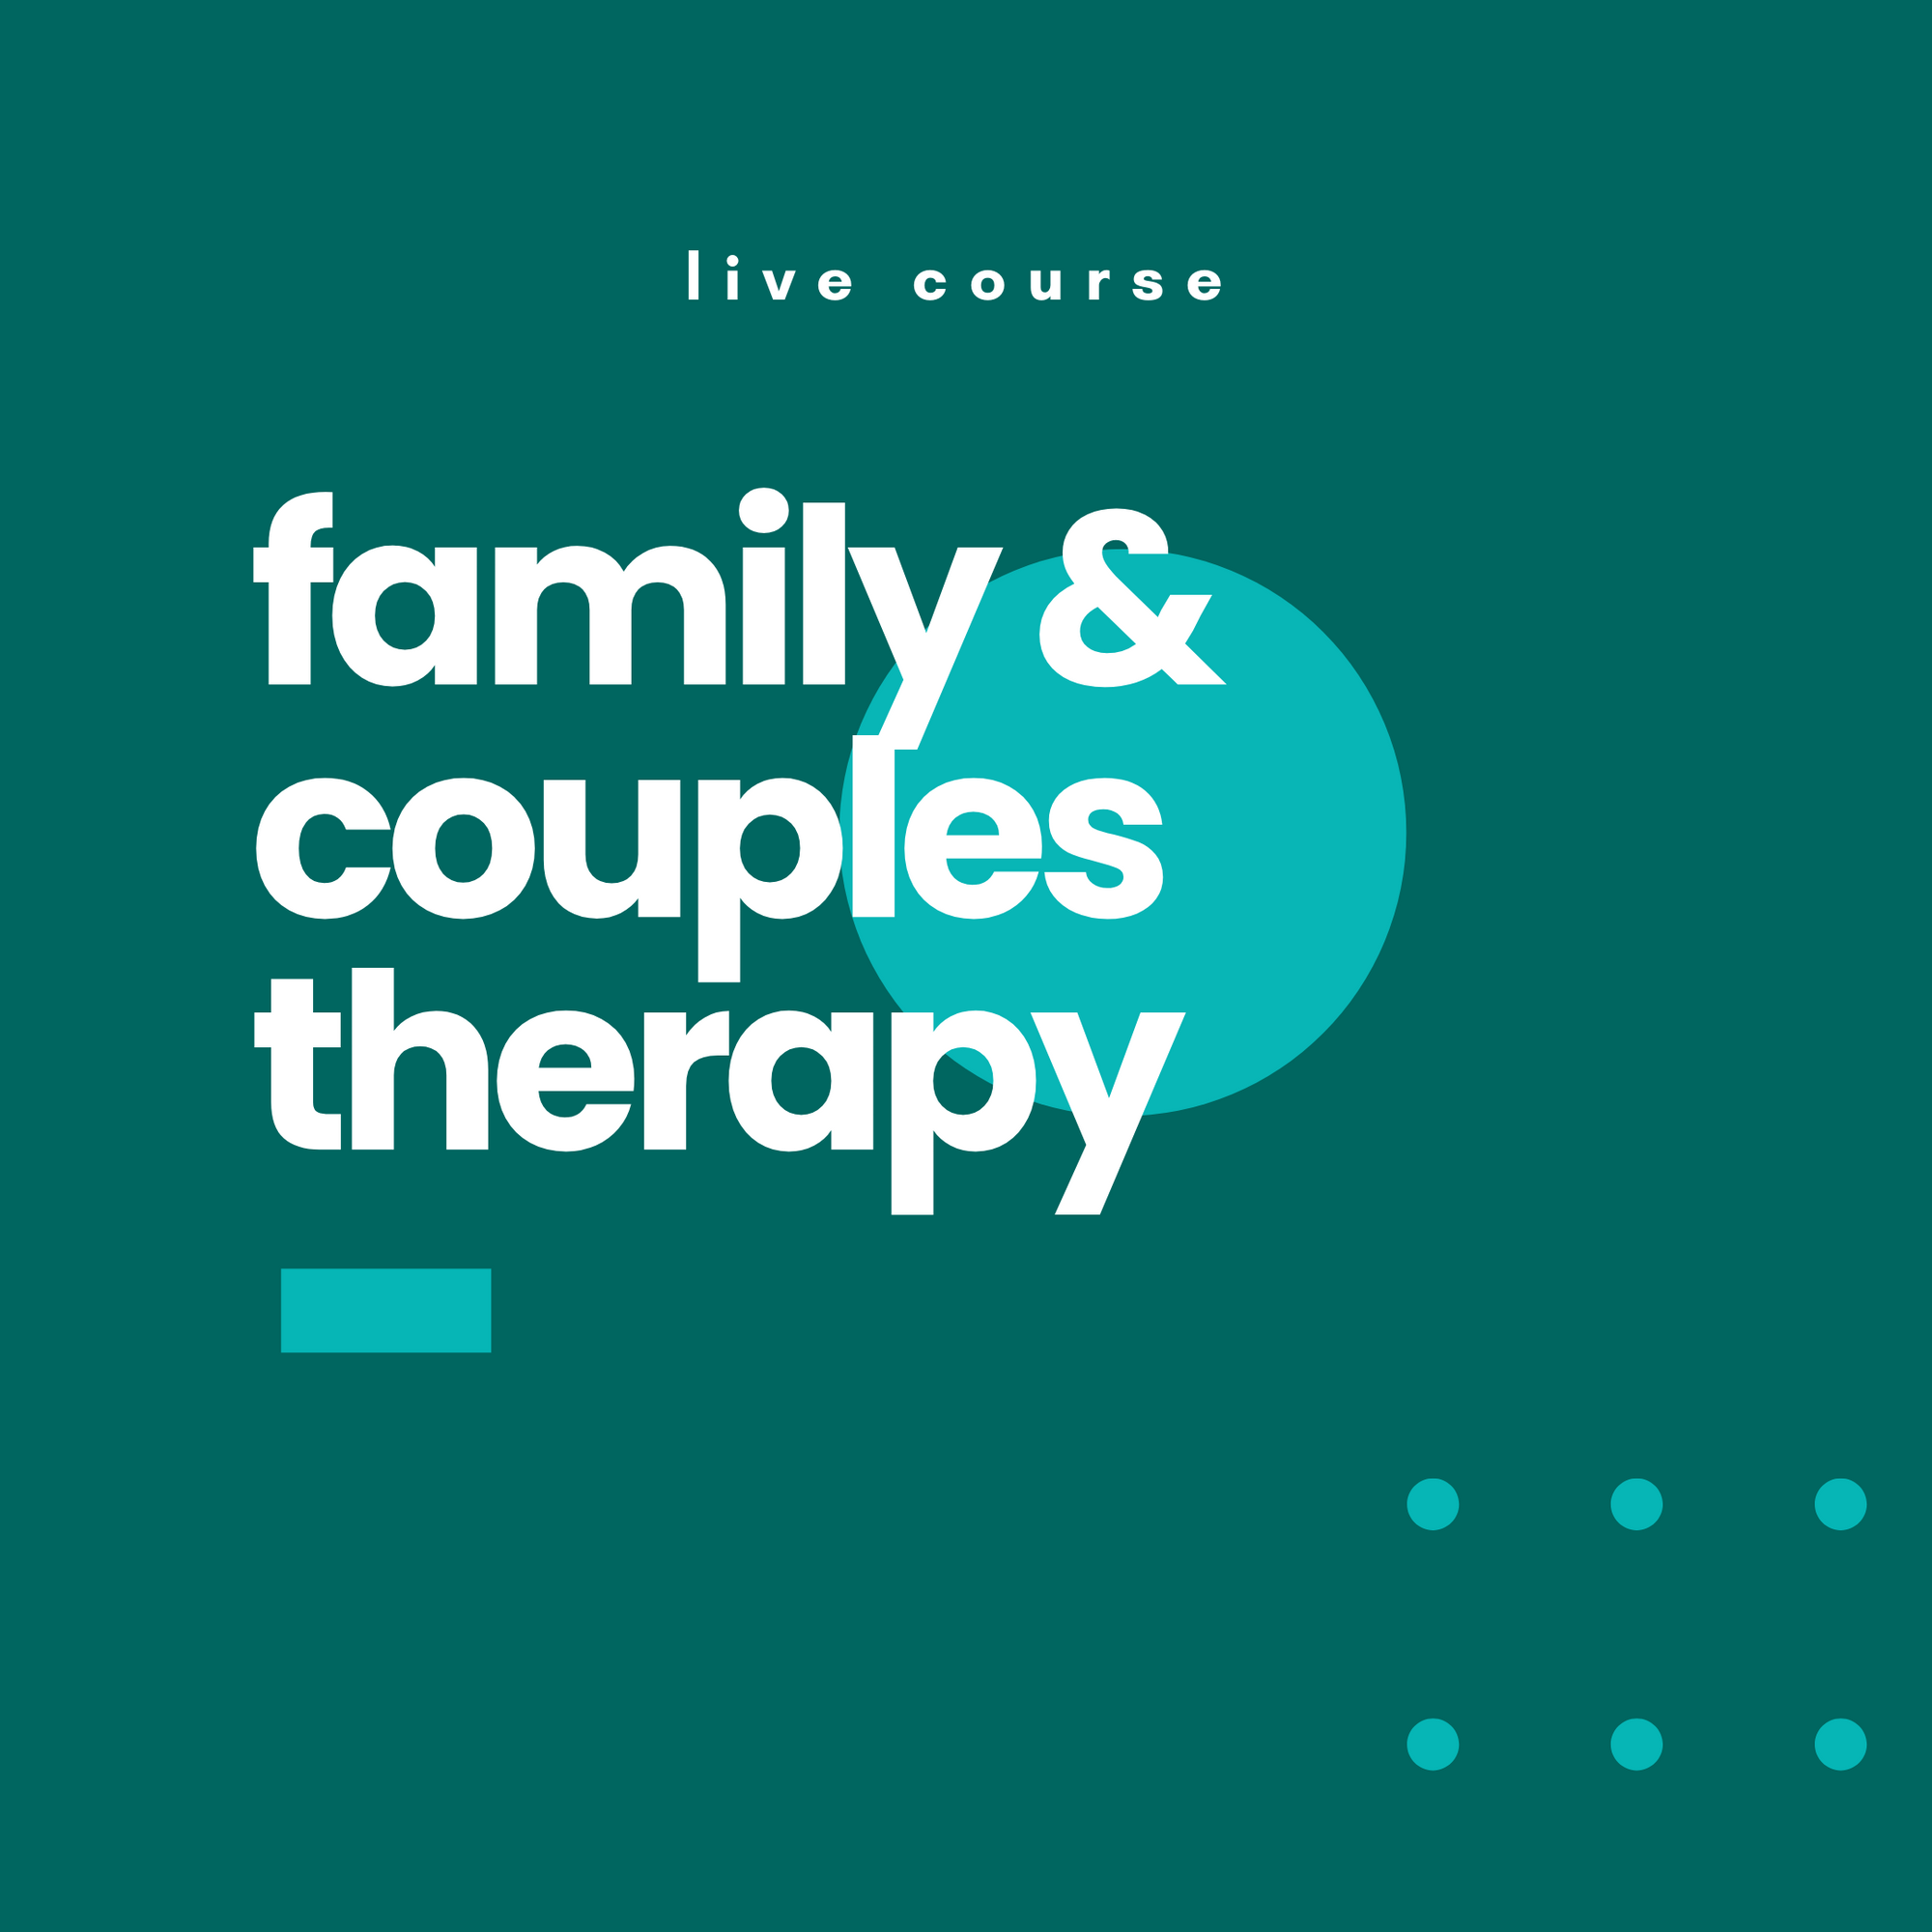 Family and Couples Therapy Course